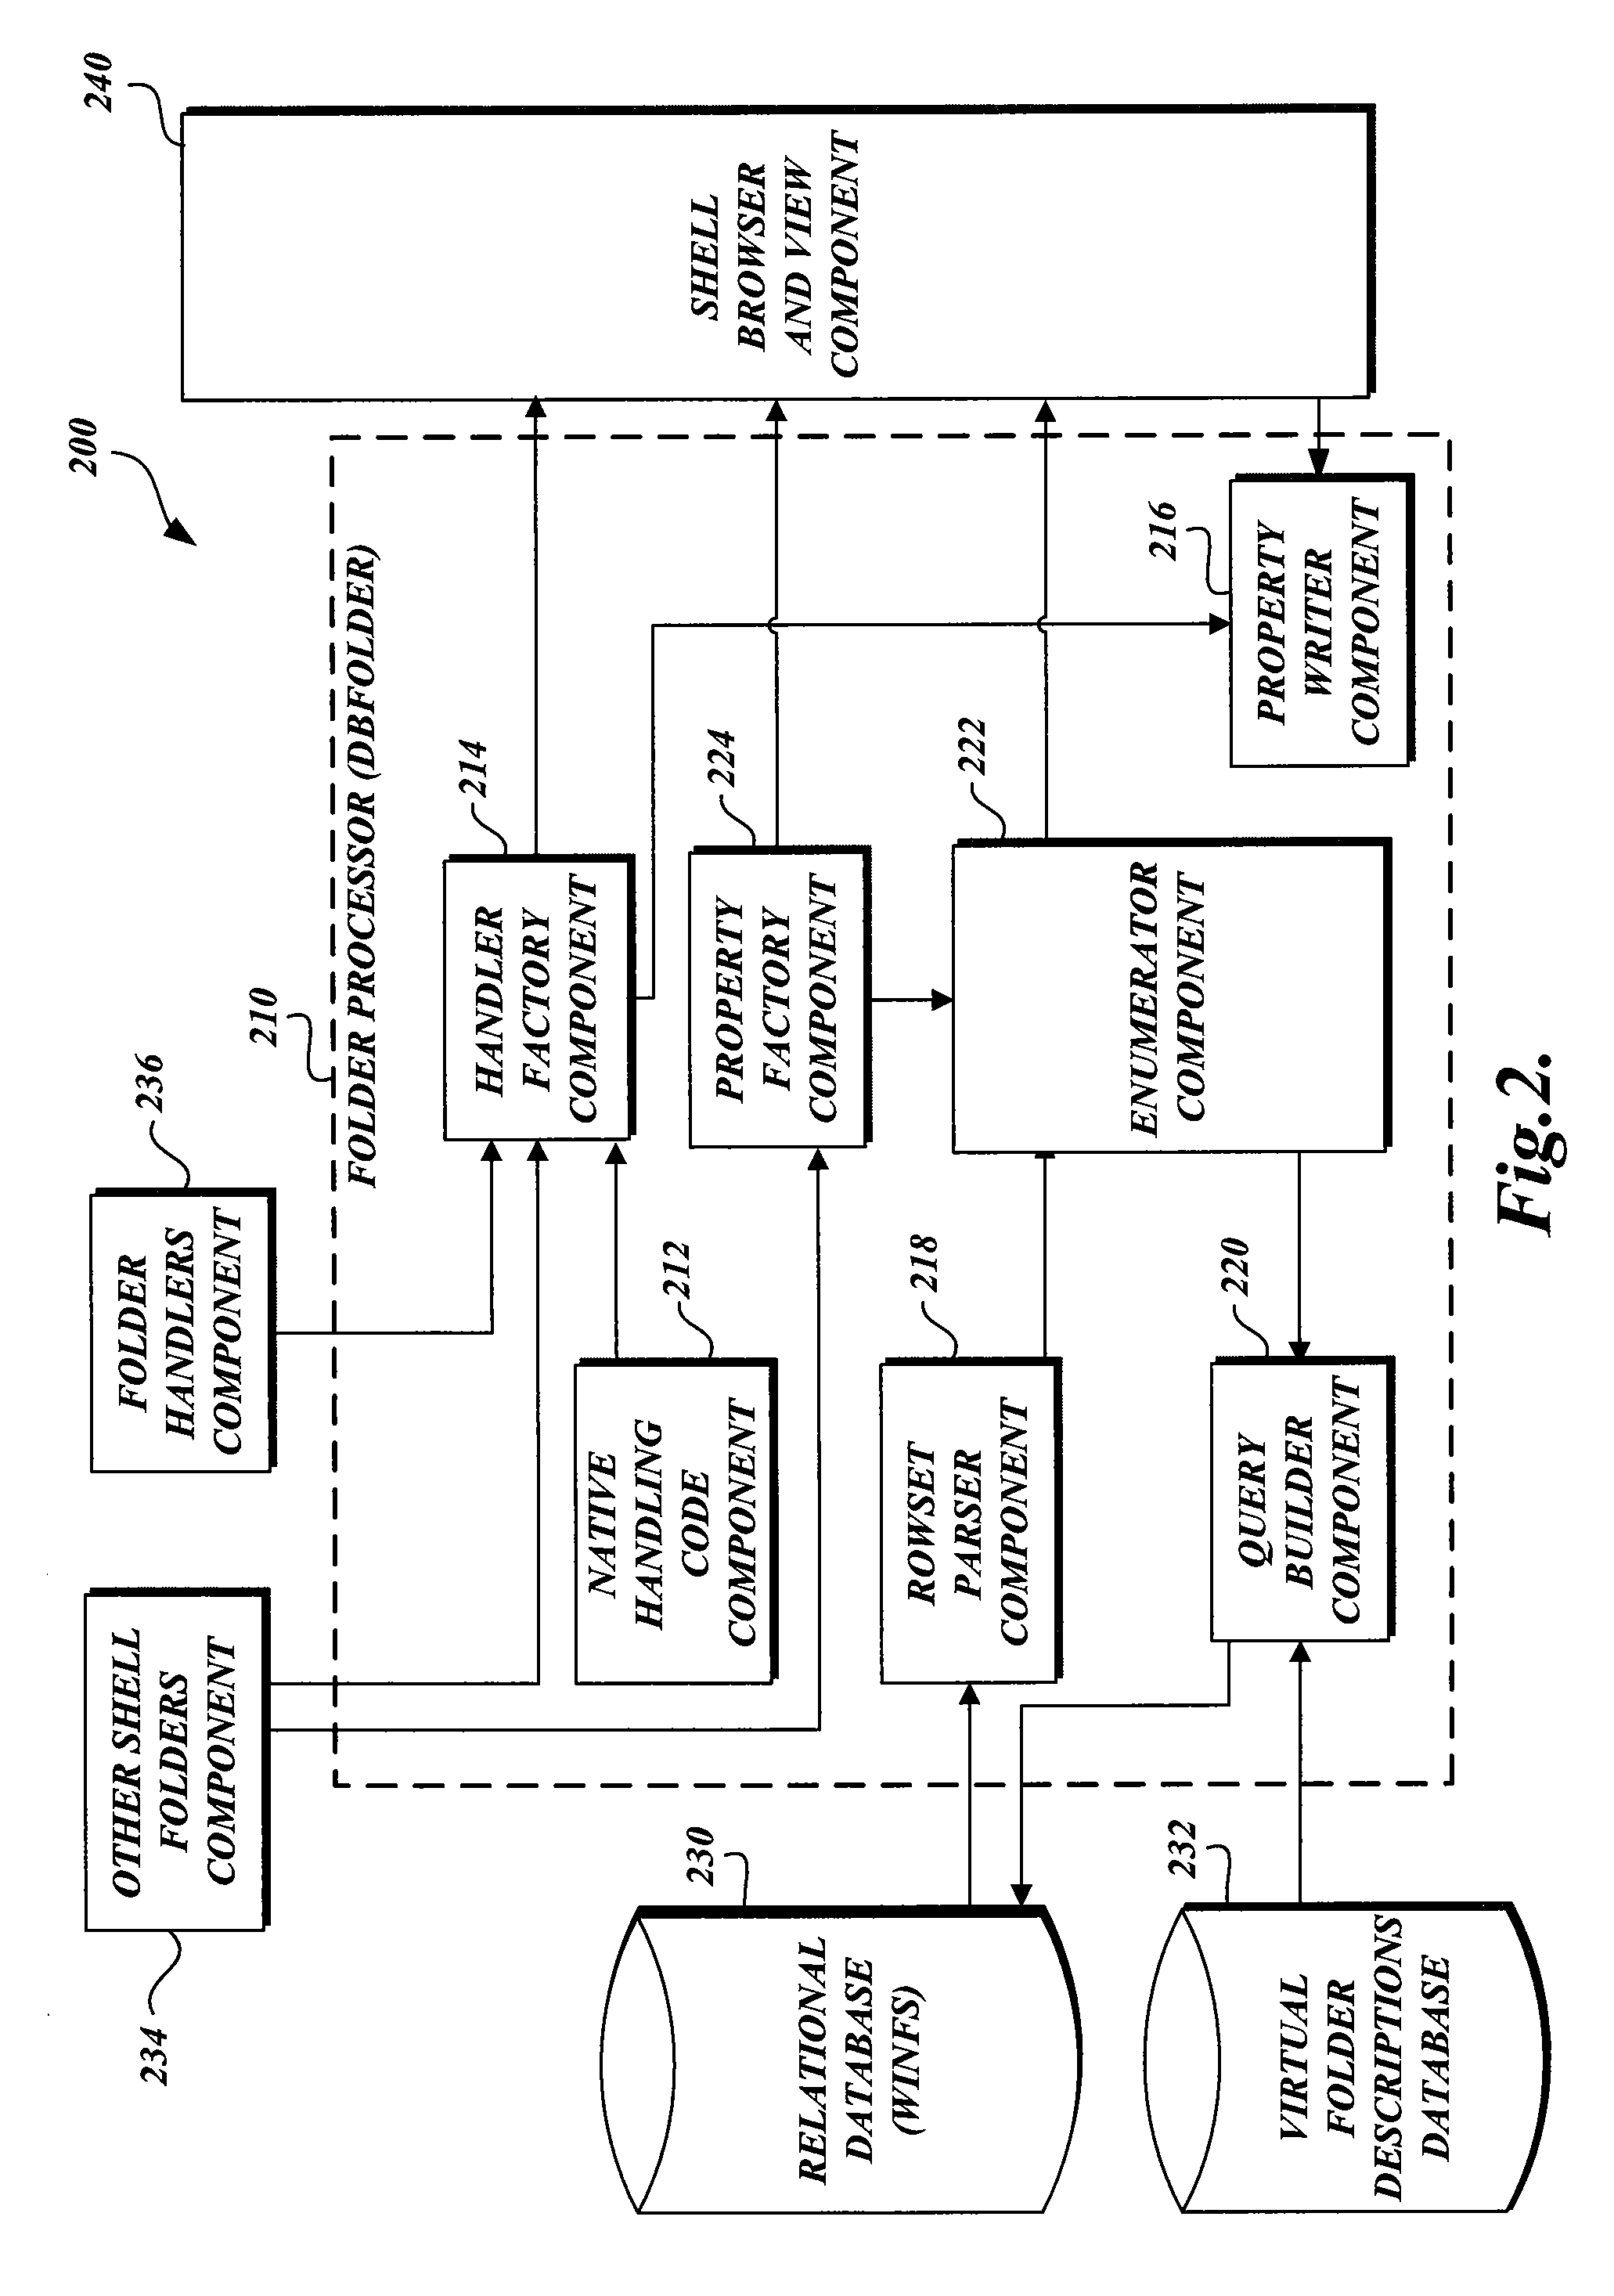 System and Method for Filtering and Organizing Items Based on Common Elements